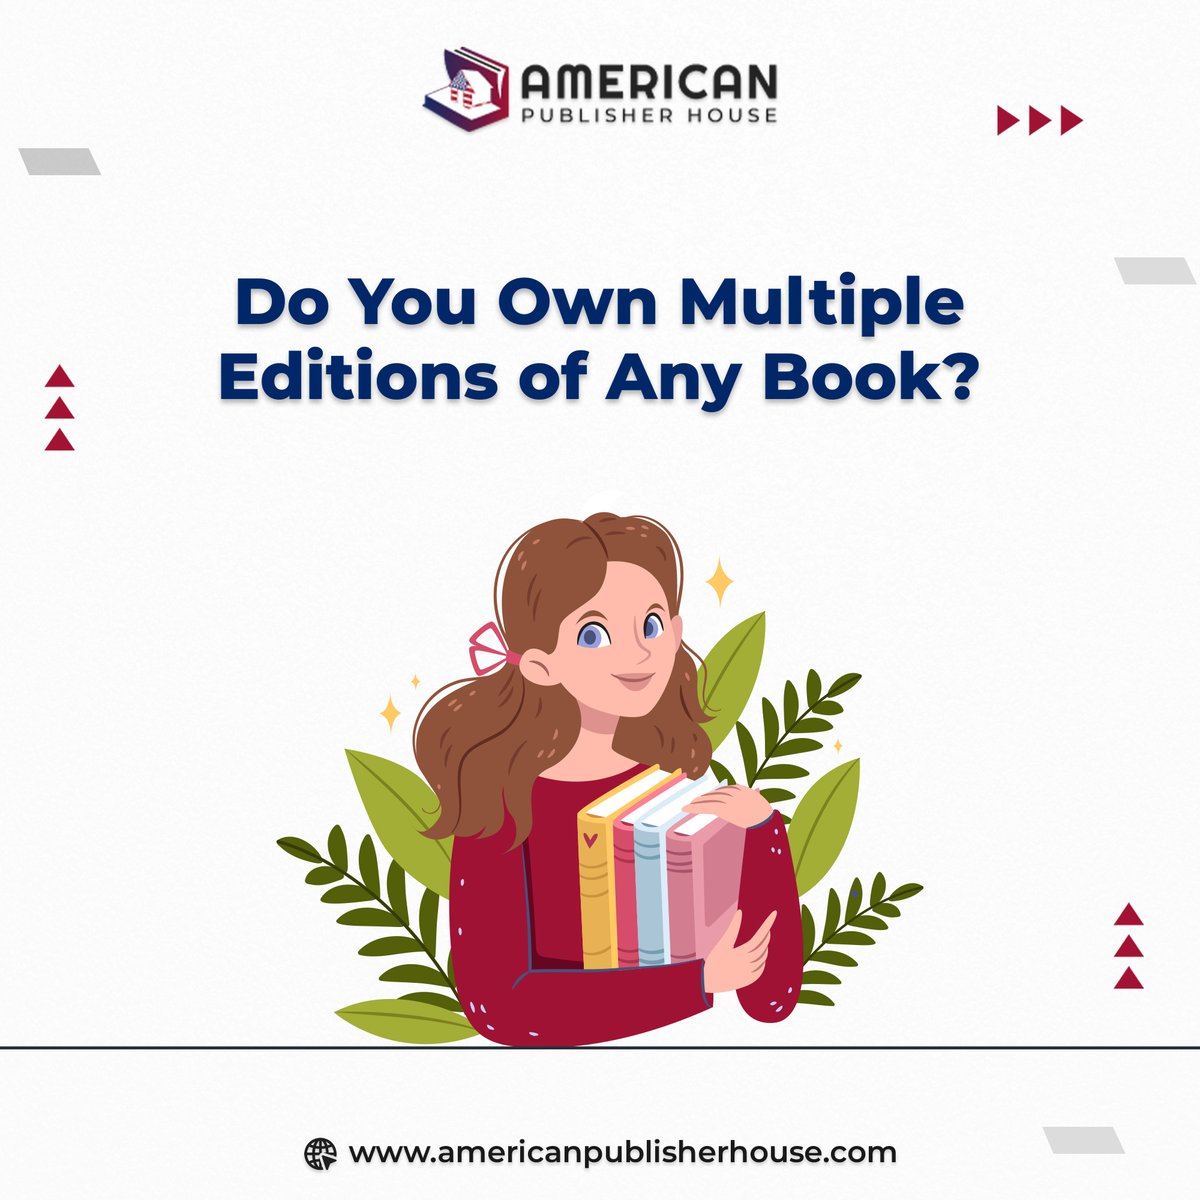 Let us know in the comments below!

#AmericanPublisherHouse #BookEditions #FavoriteBook #AuthorWebsite #BookProofreading #Audiobook #GhostWriting #Author #Success #eBookWriting #ProofReading #Editing #BookCoverDesigning #BookIllustrations #BookPublishing #AudioBook